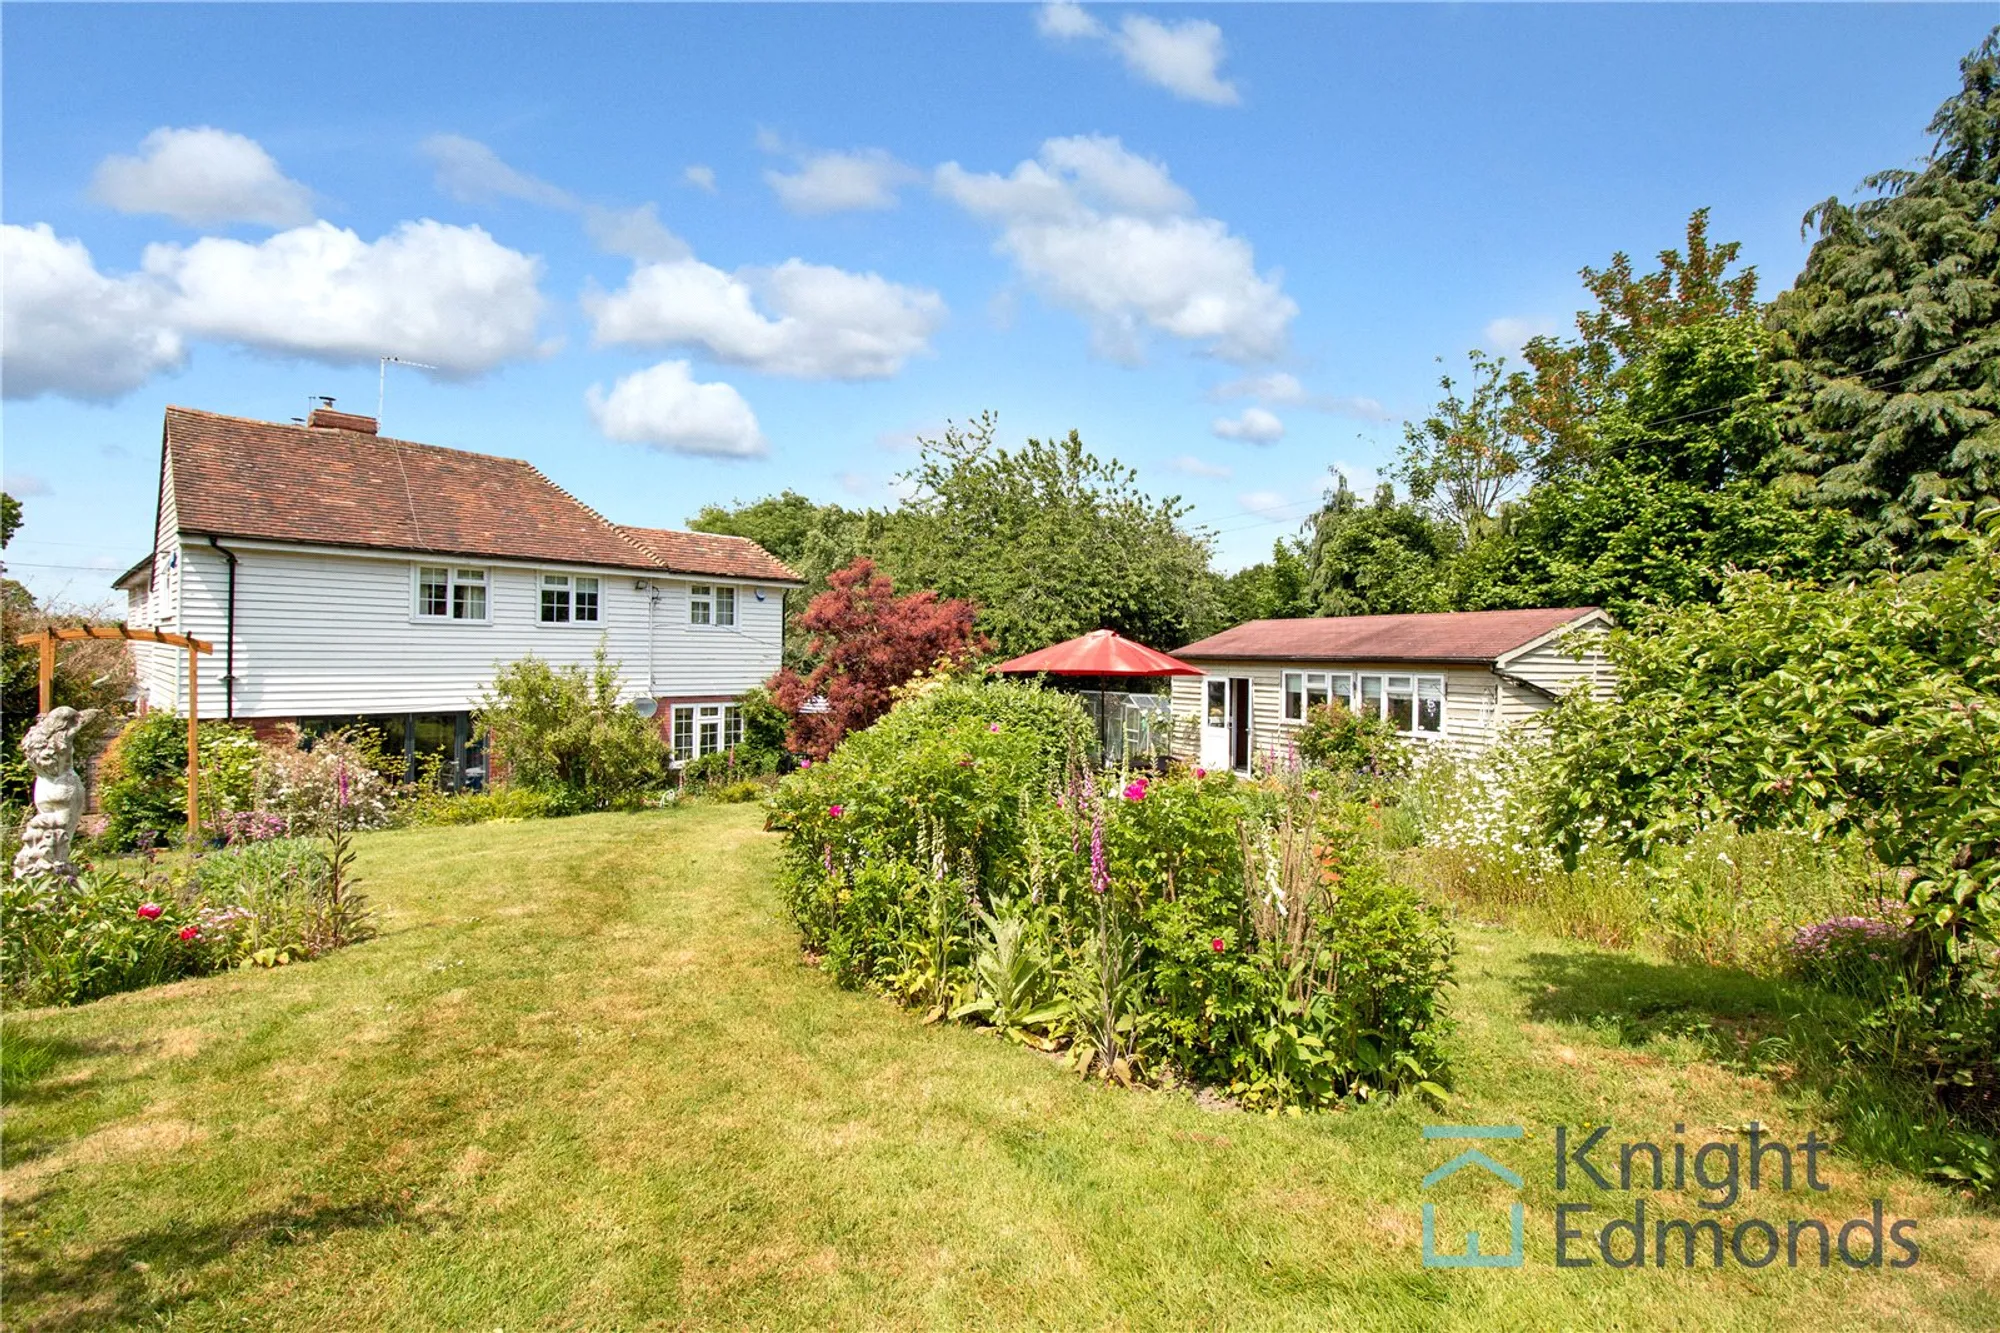 3 bed end of terrace house for sale in Hilltop, Maidstone  - Property Image 2